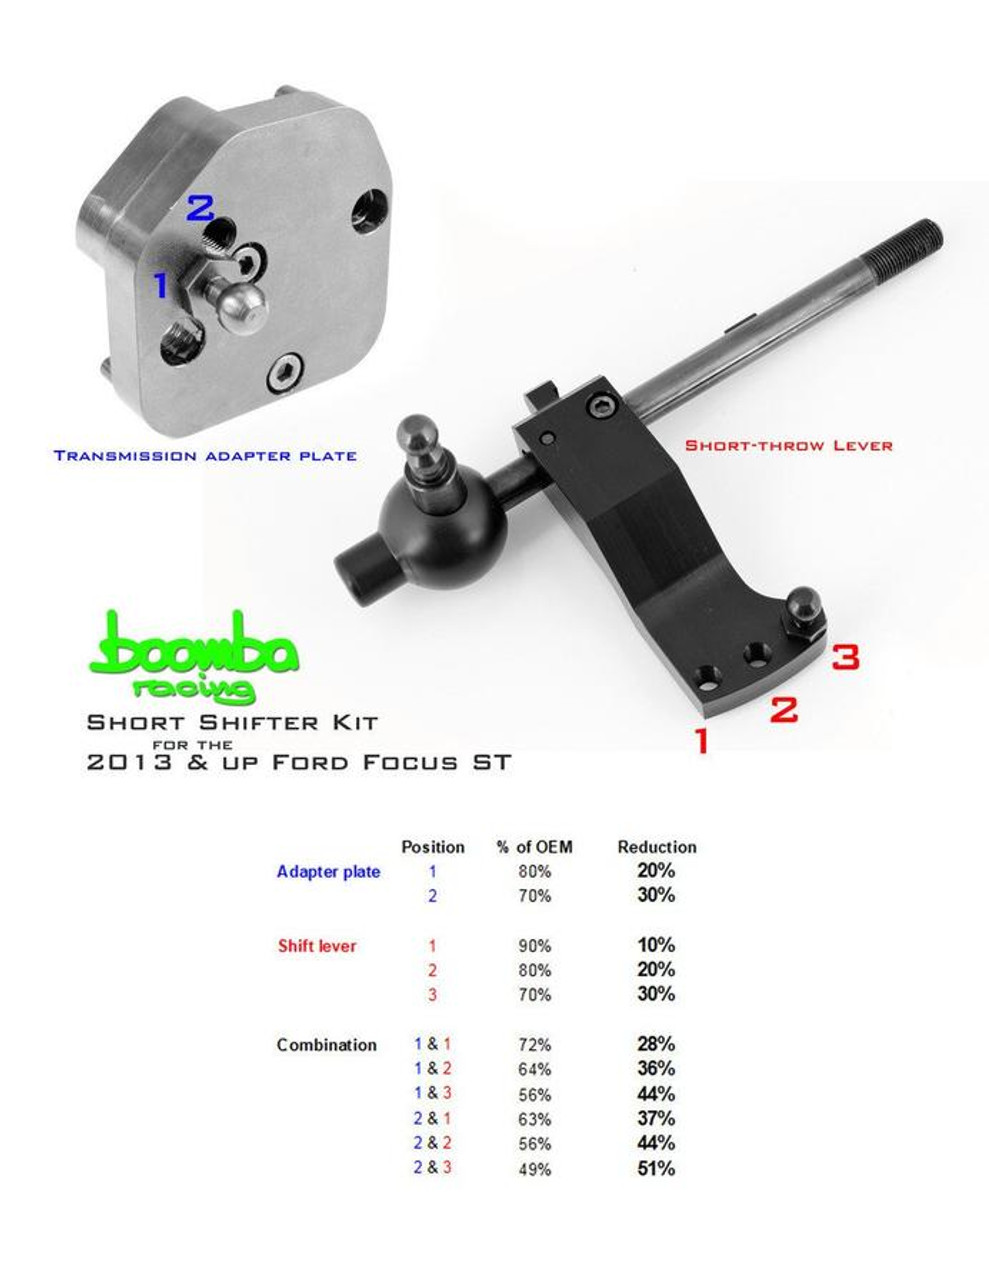 Boomba Racing Short Shifter Transmission Adapter | 2013+ Ford Focus ST